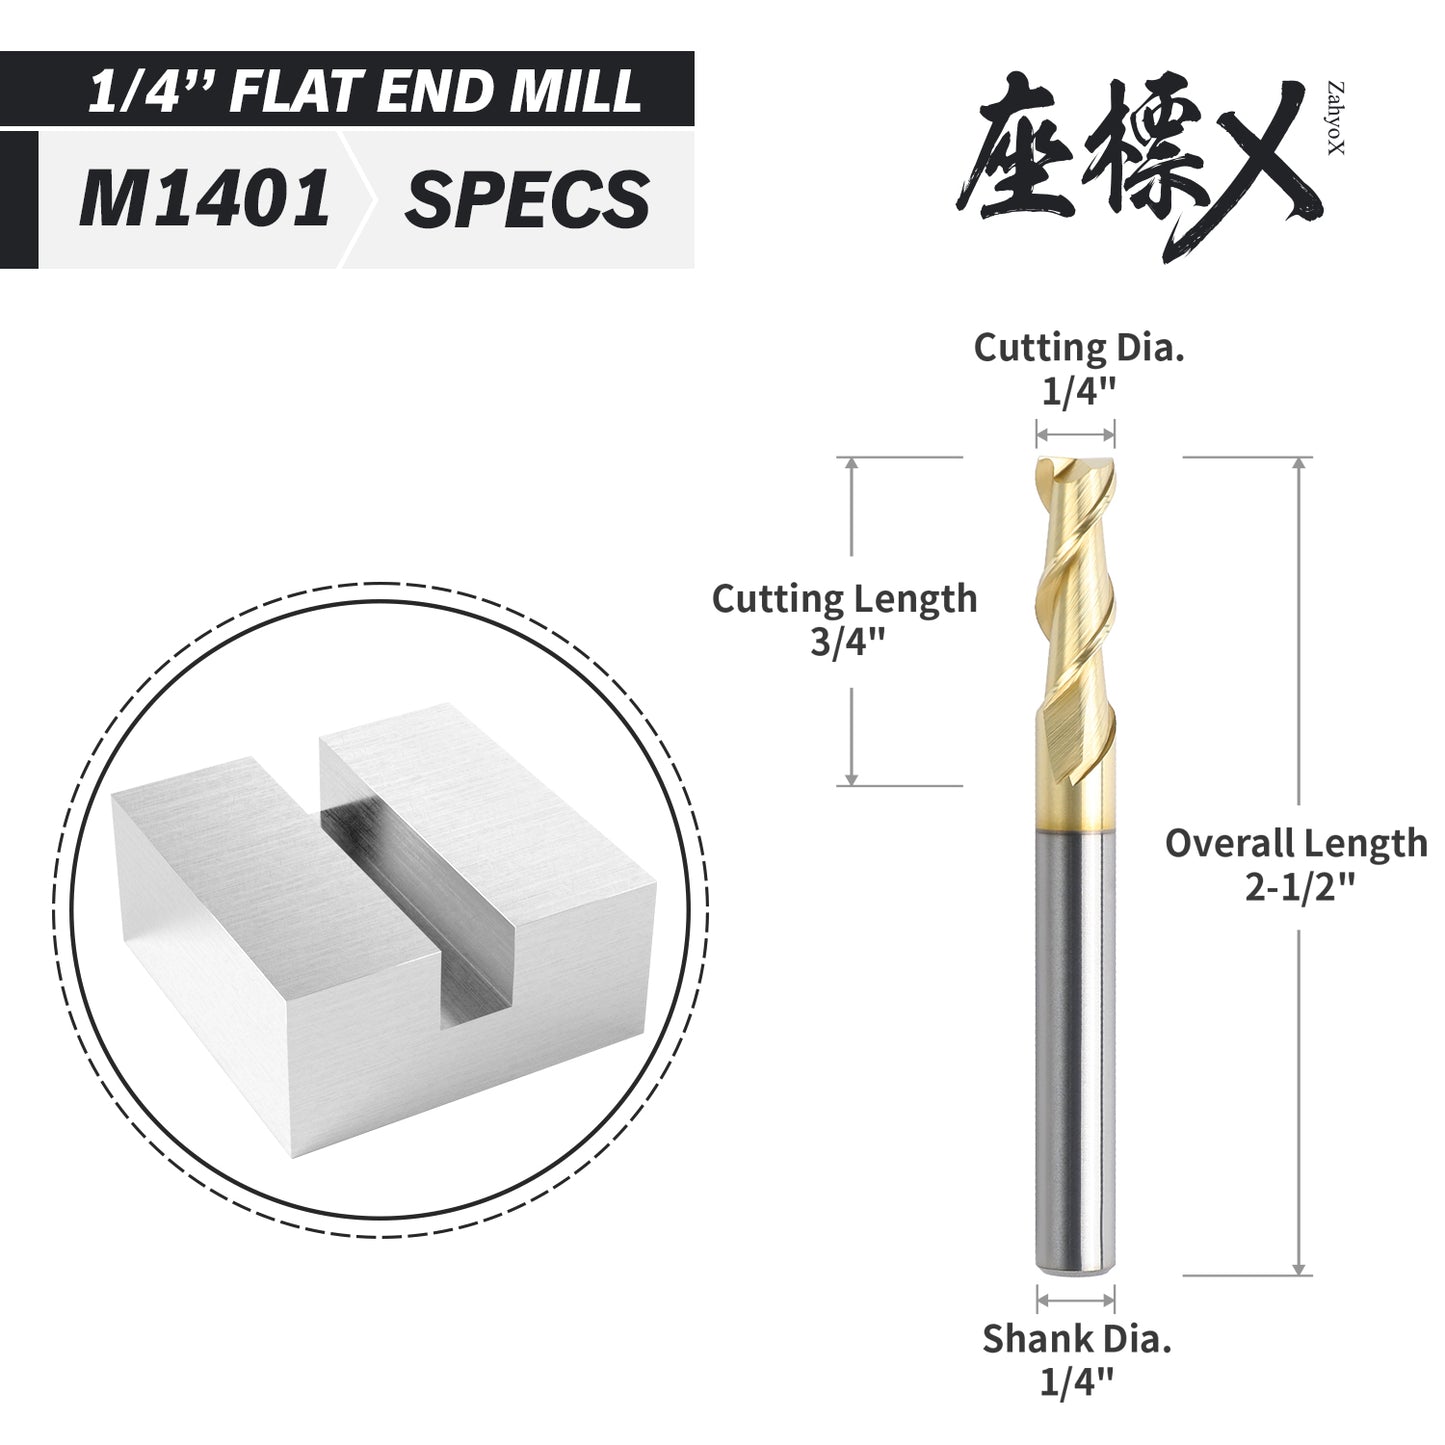 M1401 ZrN Coated Upcut End Mill for Aluminum - 2 Flutes - 1/4 Dia - 1/4 Shank - 3/4 LOC - 2-1/2 OAL